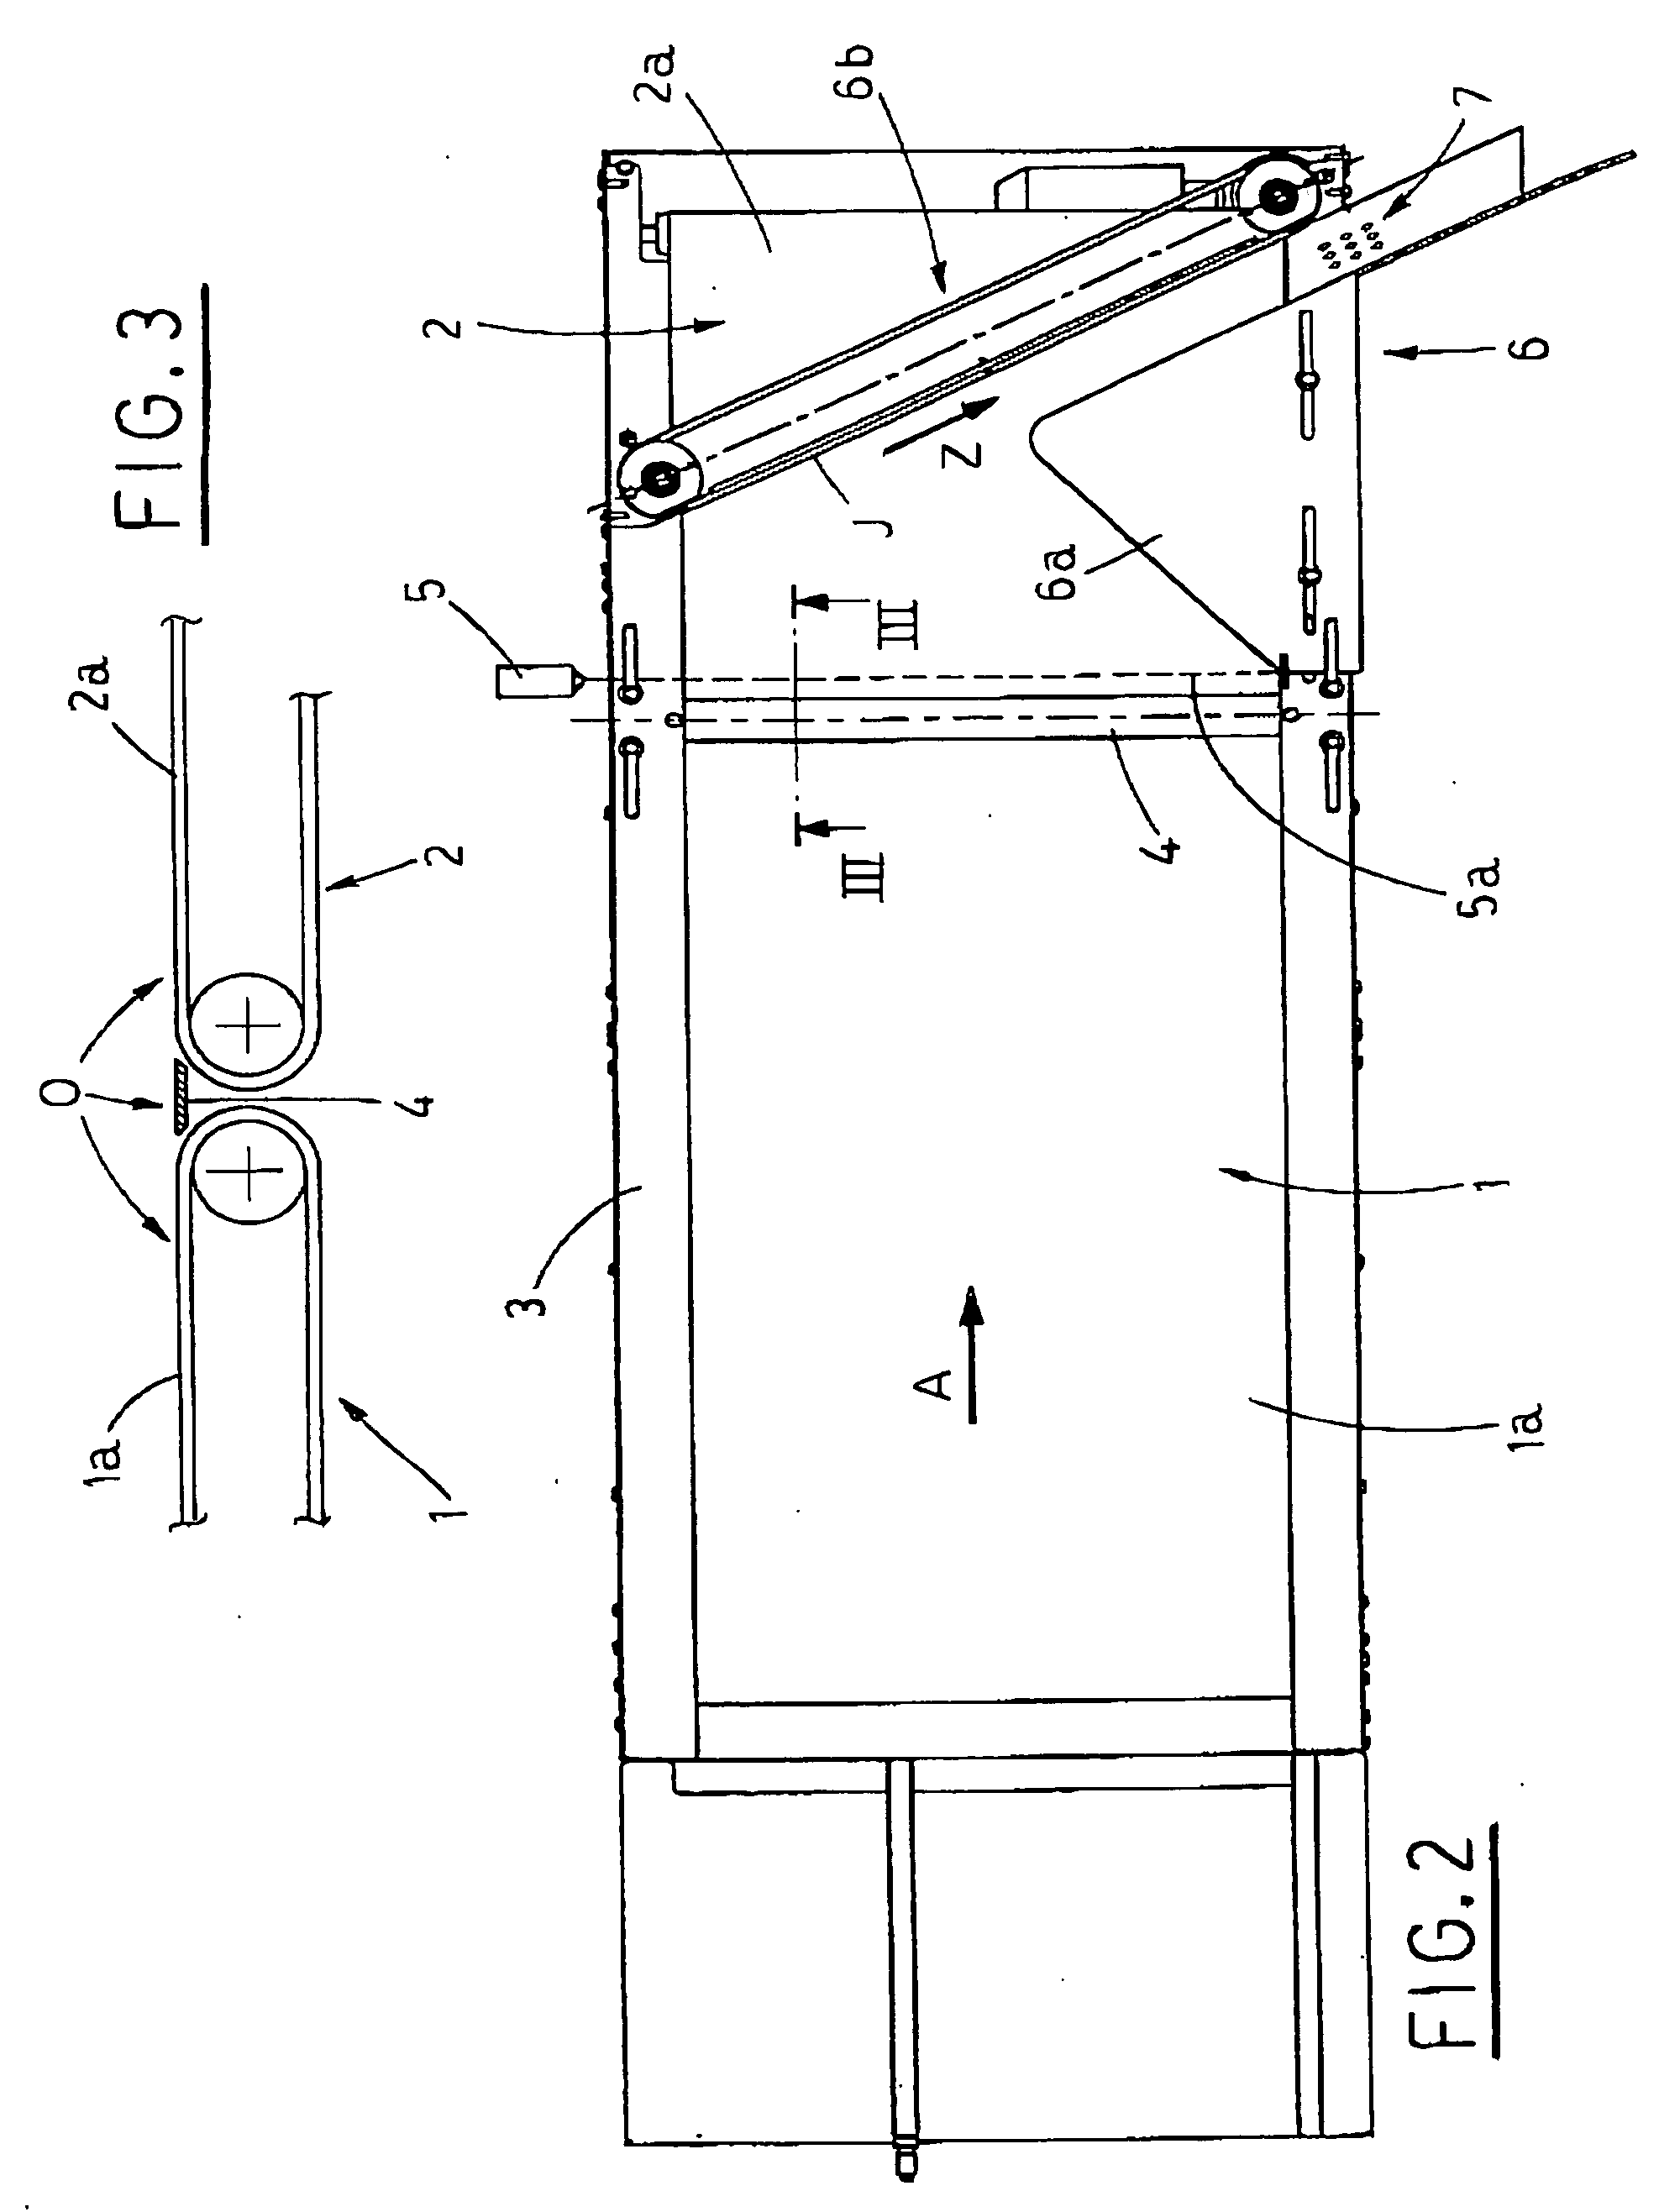 Device for conveying and arranging cylindrical elements, such as bottles, in a row